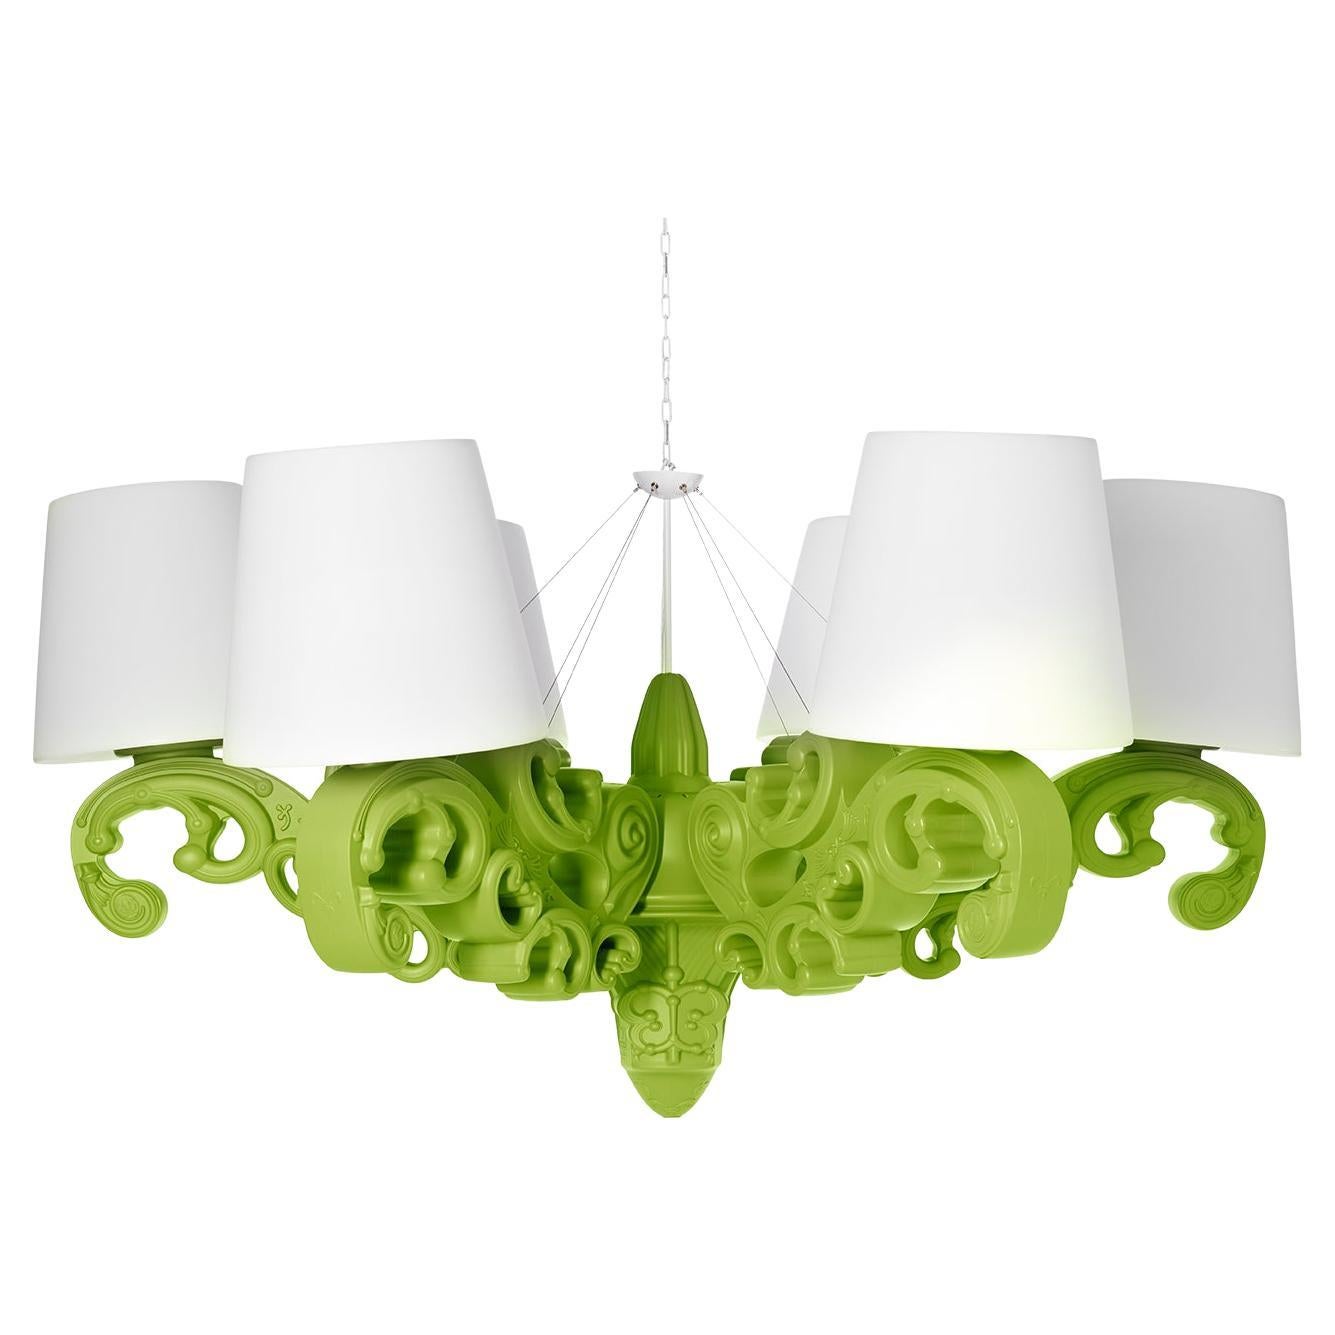 Slide Design Crown of Love Pendant Light in Lime Green by Moro, Pigatti For Sale